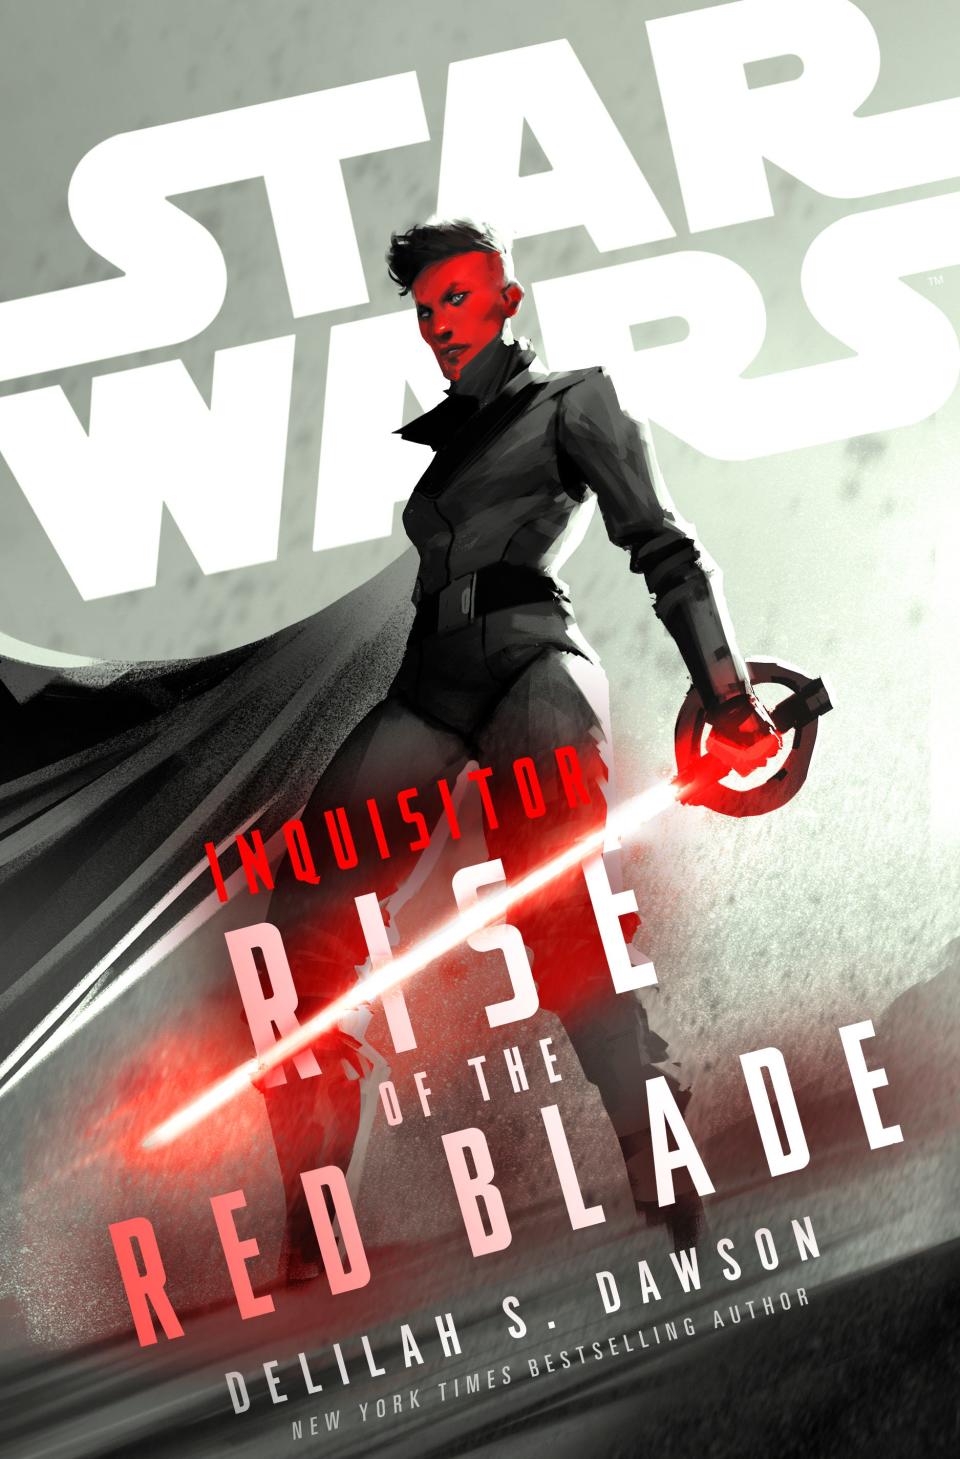 A young Jedi named Iskat Akaris turns to the dark side in the novel "Star Wars: Inquisitor: Rise of the Red Blade."